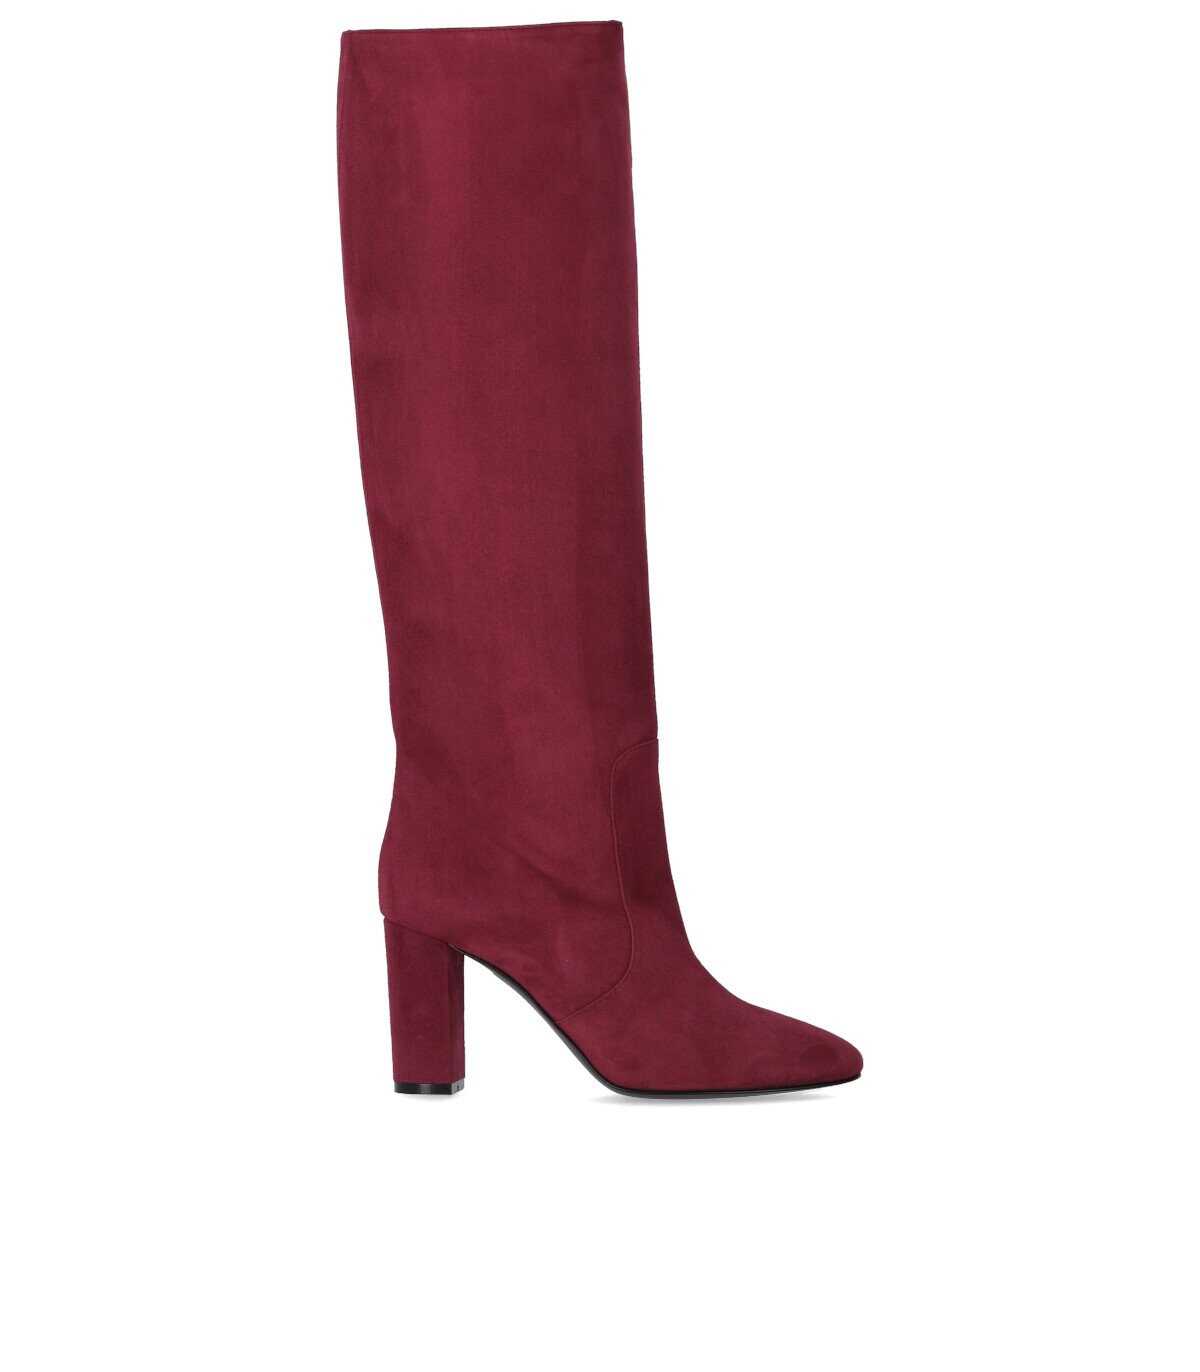 Poze Via Roma 15 VIA ROMA 15 RED SUEDE HIGH HEELED BOOT Red B-Mall